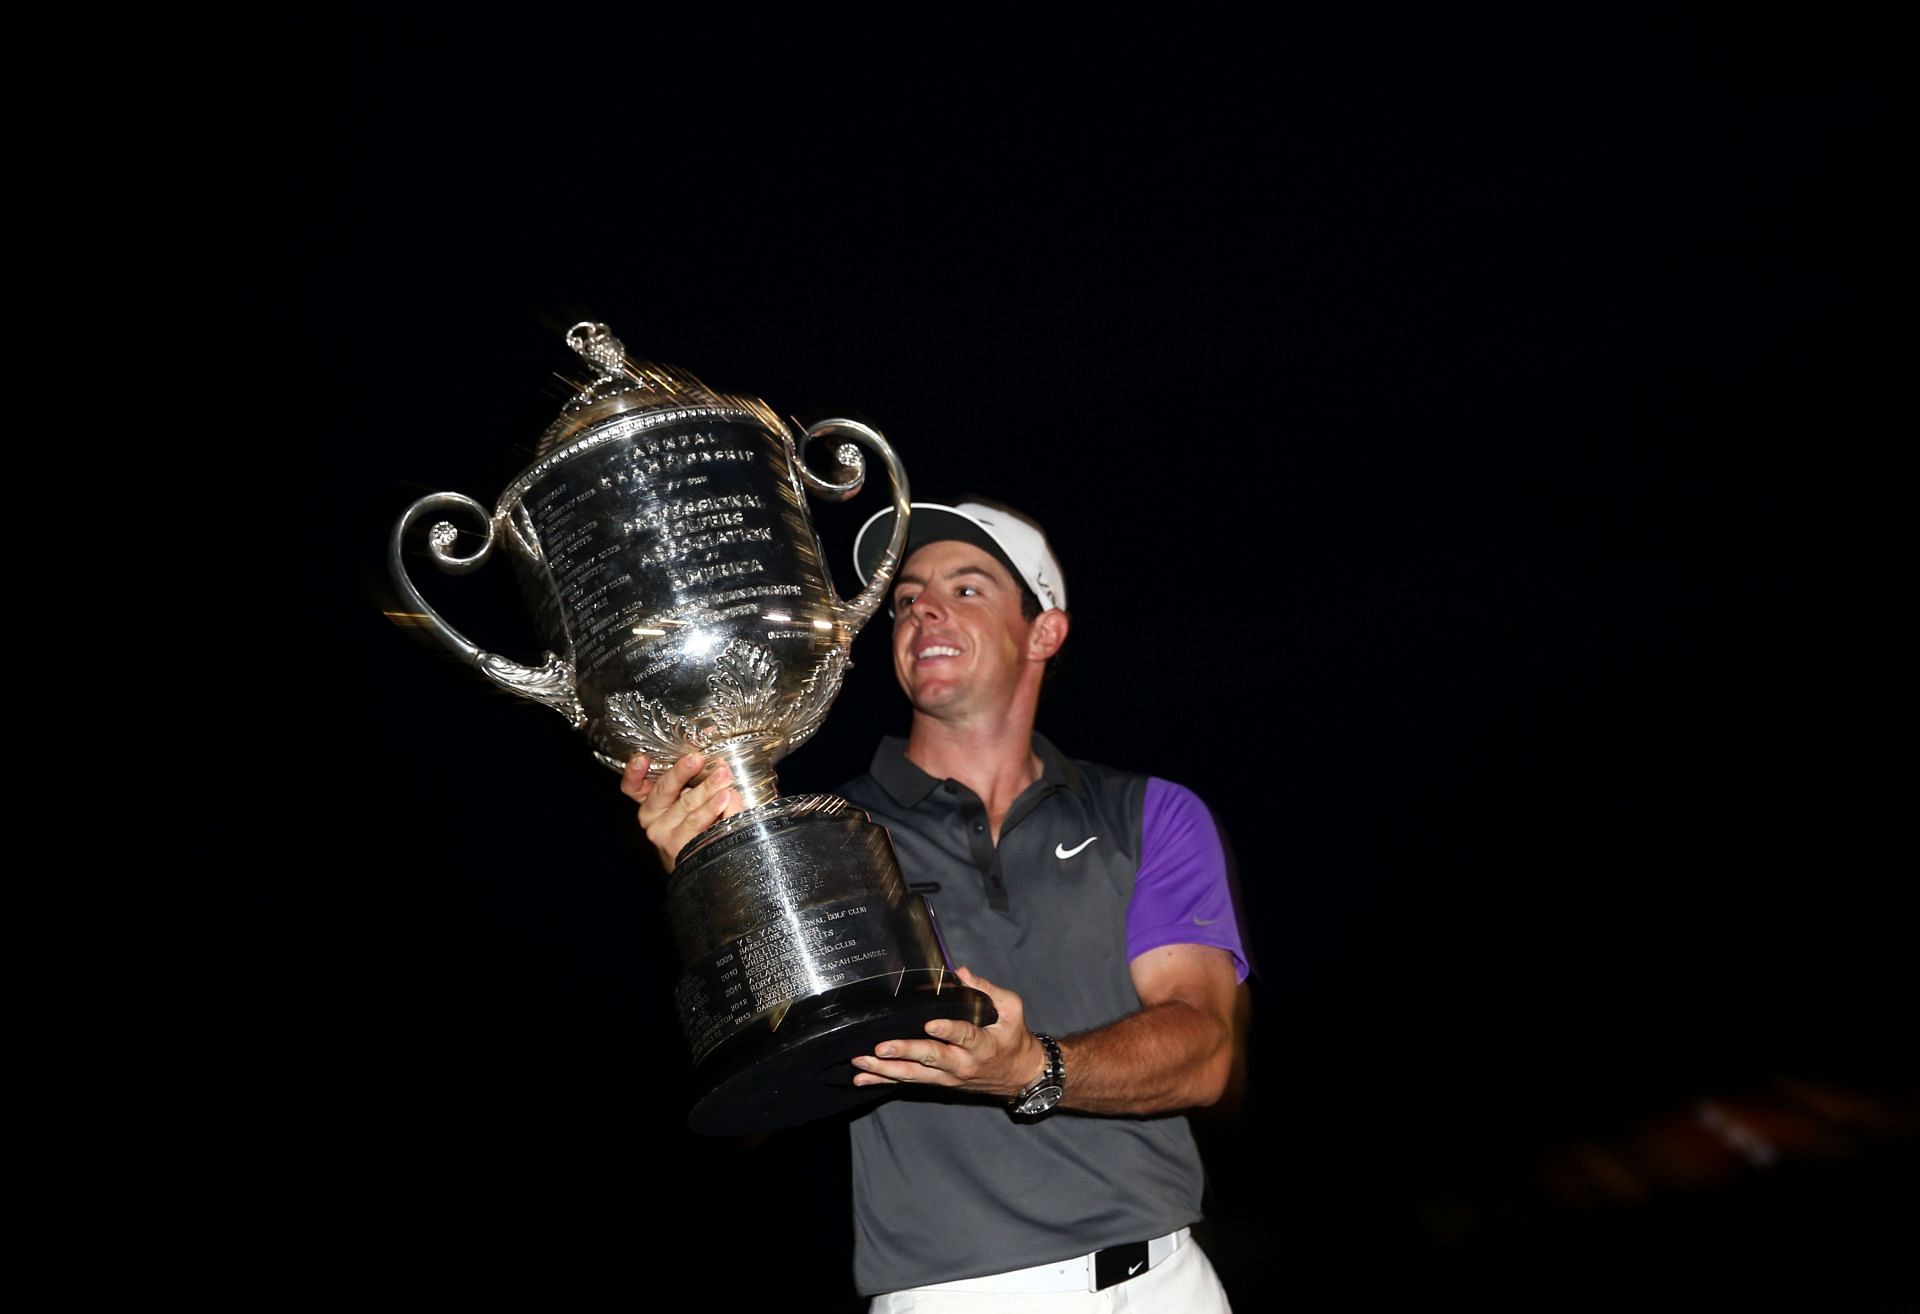 Rory McIlroy holding his (until now) last major tournament trophy: 2014 PGA Championship (Image via Getty).